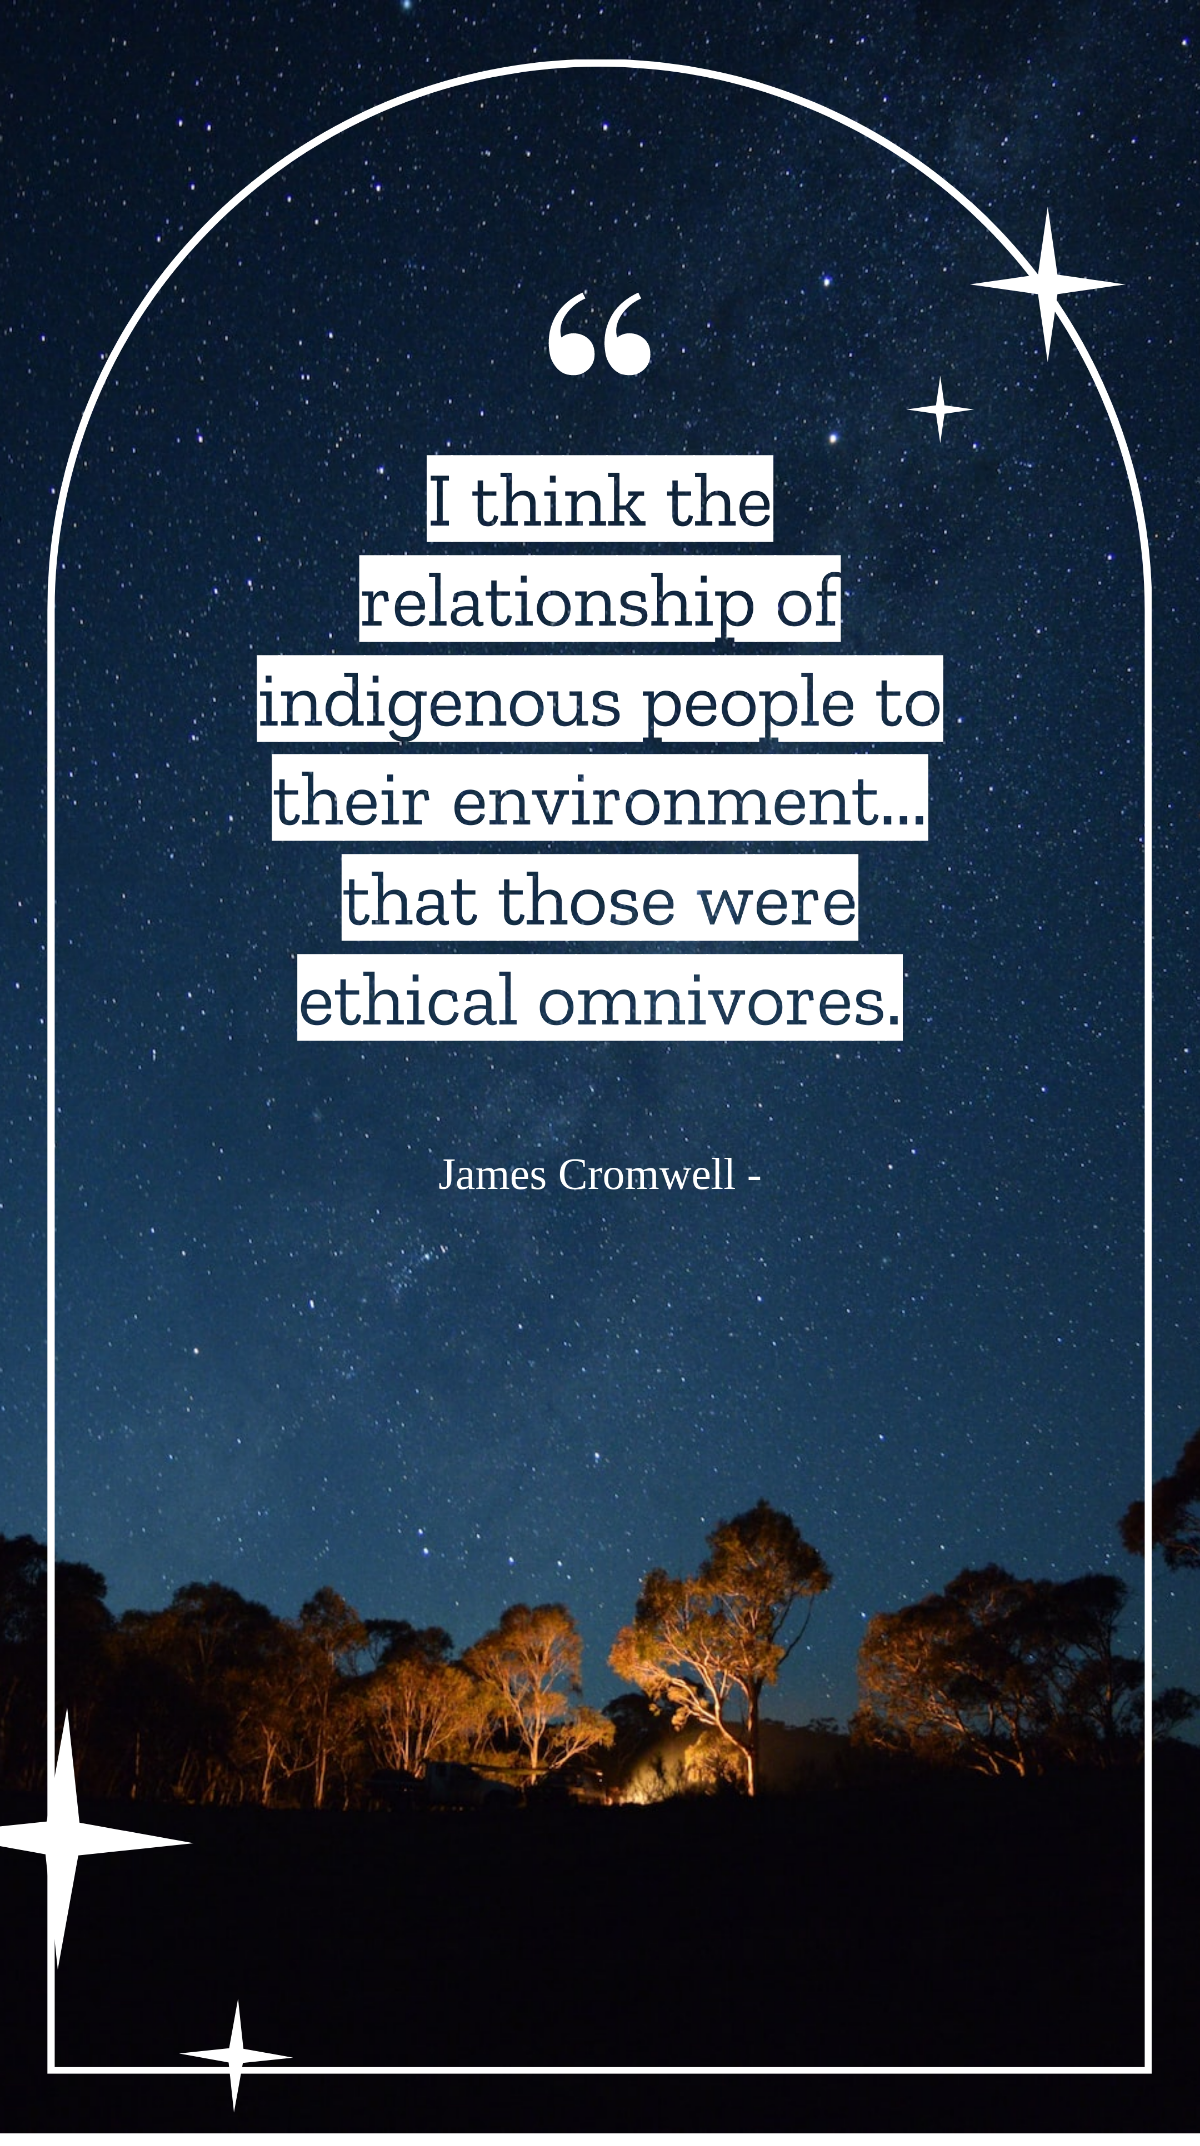 James Cromwell - I think the relationship of indigenous people to their environment... that those were ethical omnivores. Template